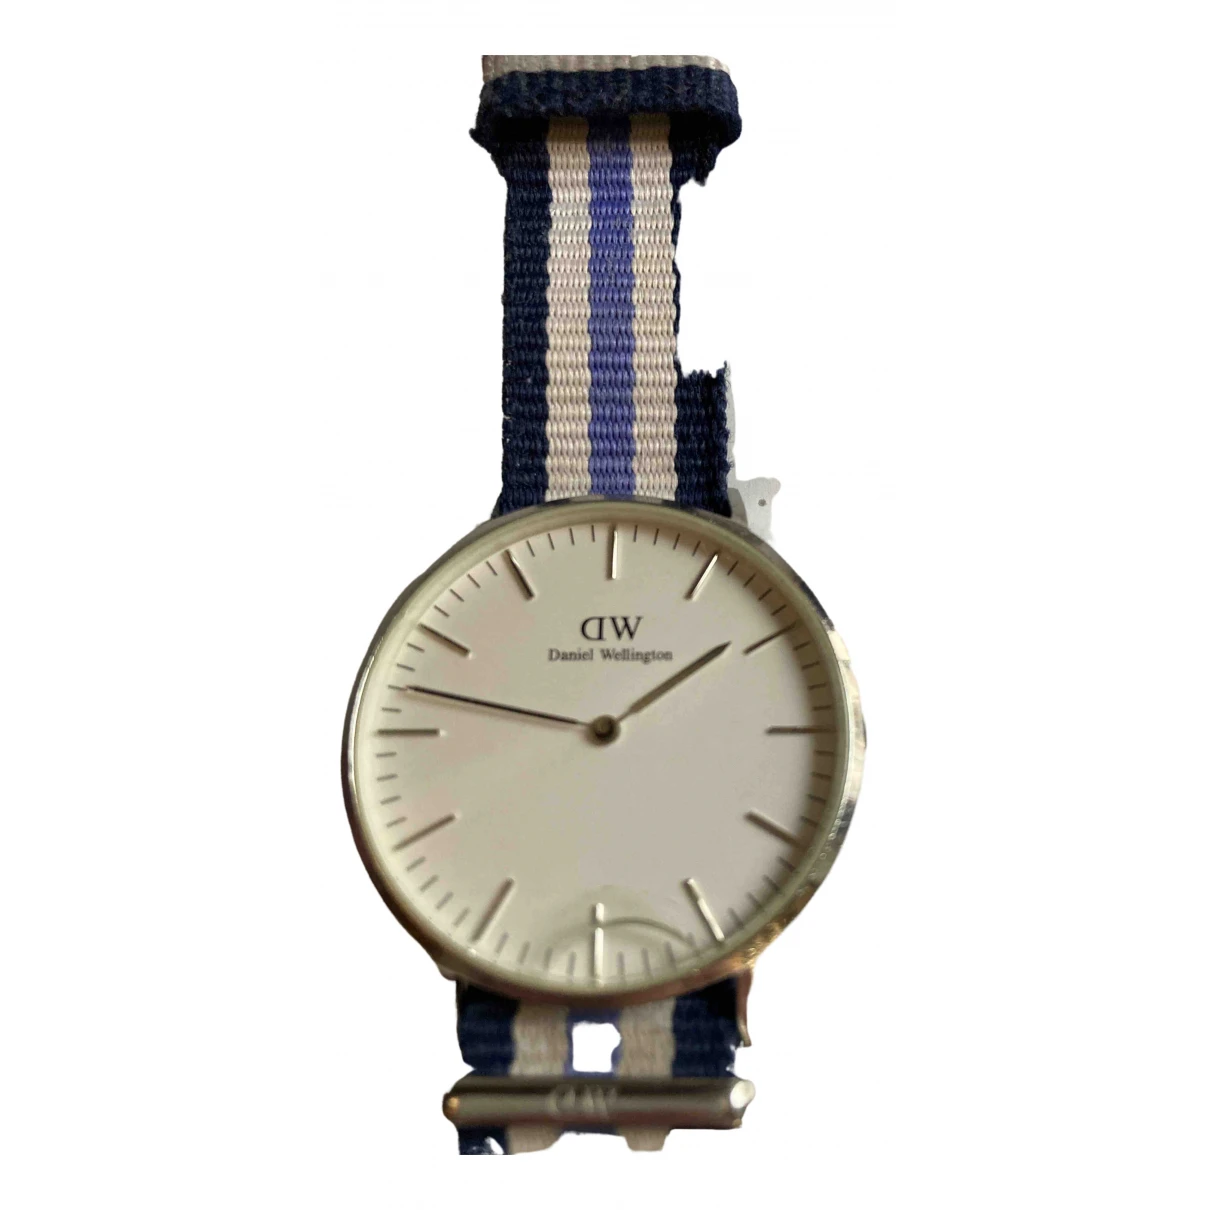 accessories Daniel Wellington watches for Female Steel. Used condition